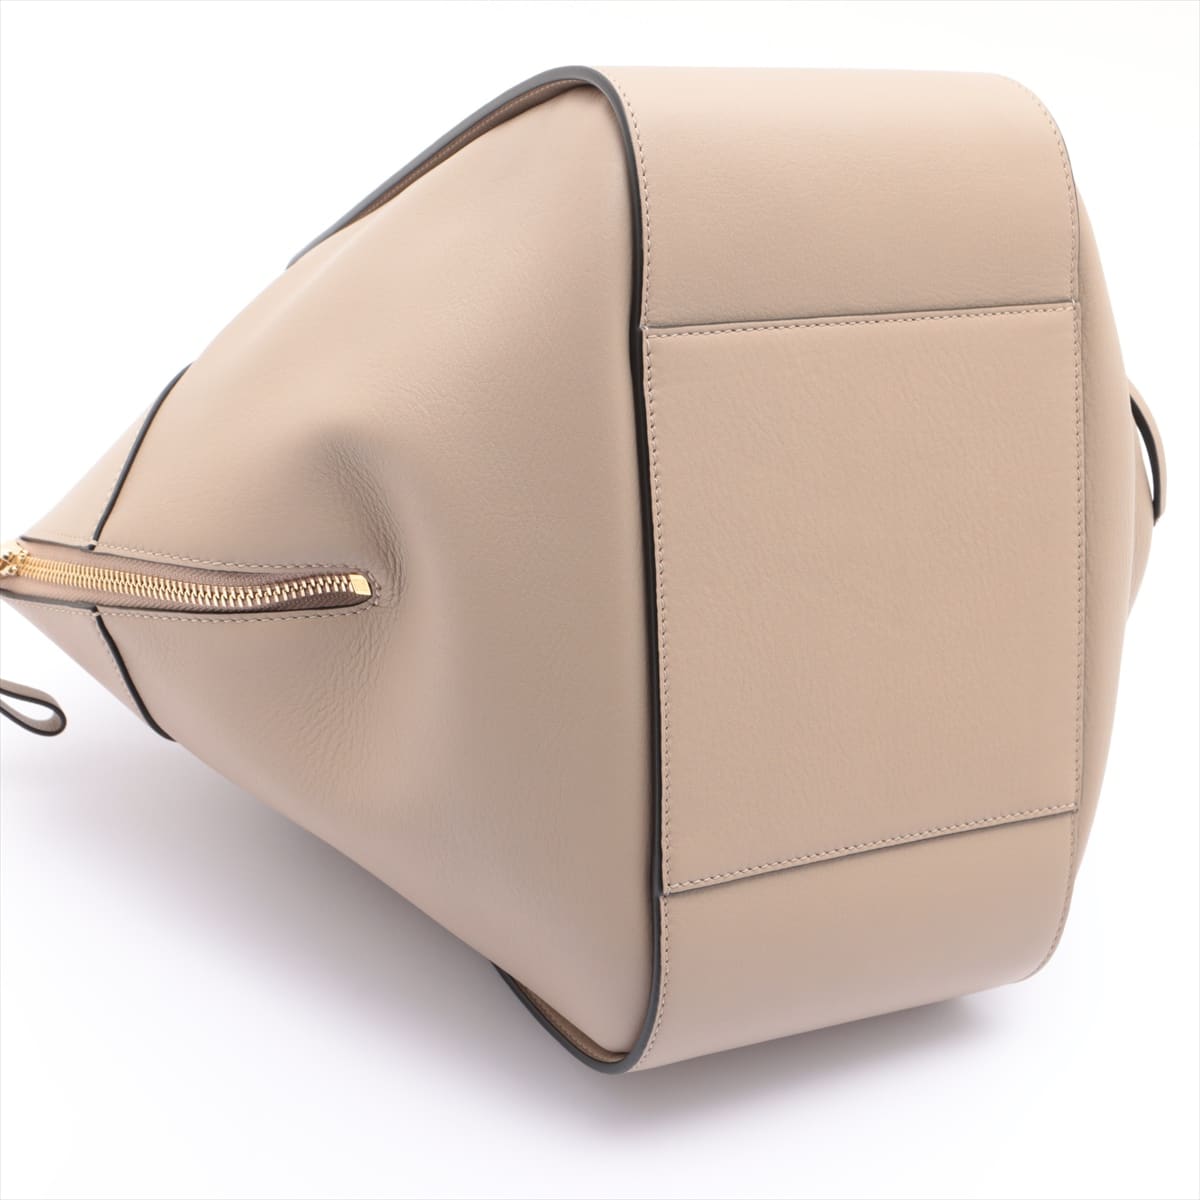 Loewe Hammock small Leather 2way shoulder bag Beige There is an outlet mark